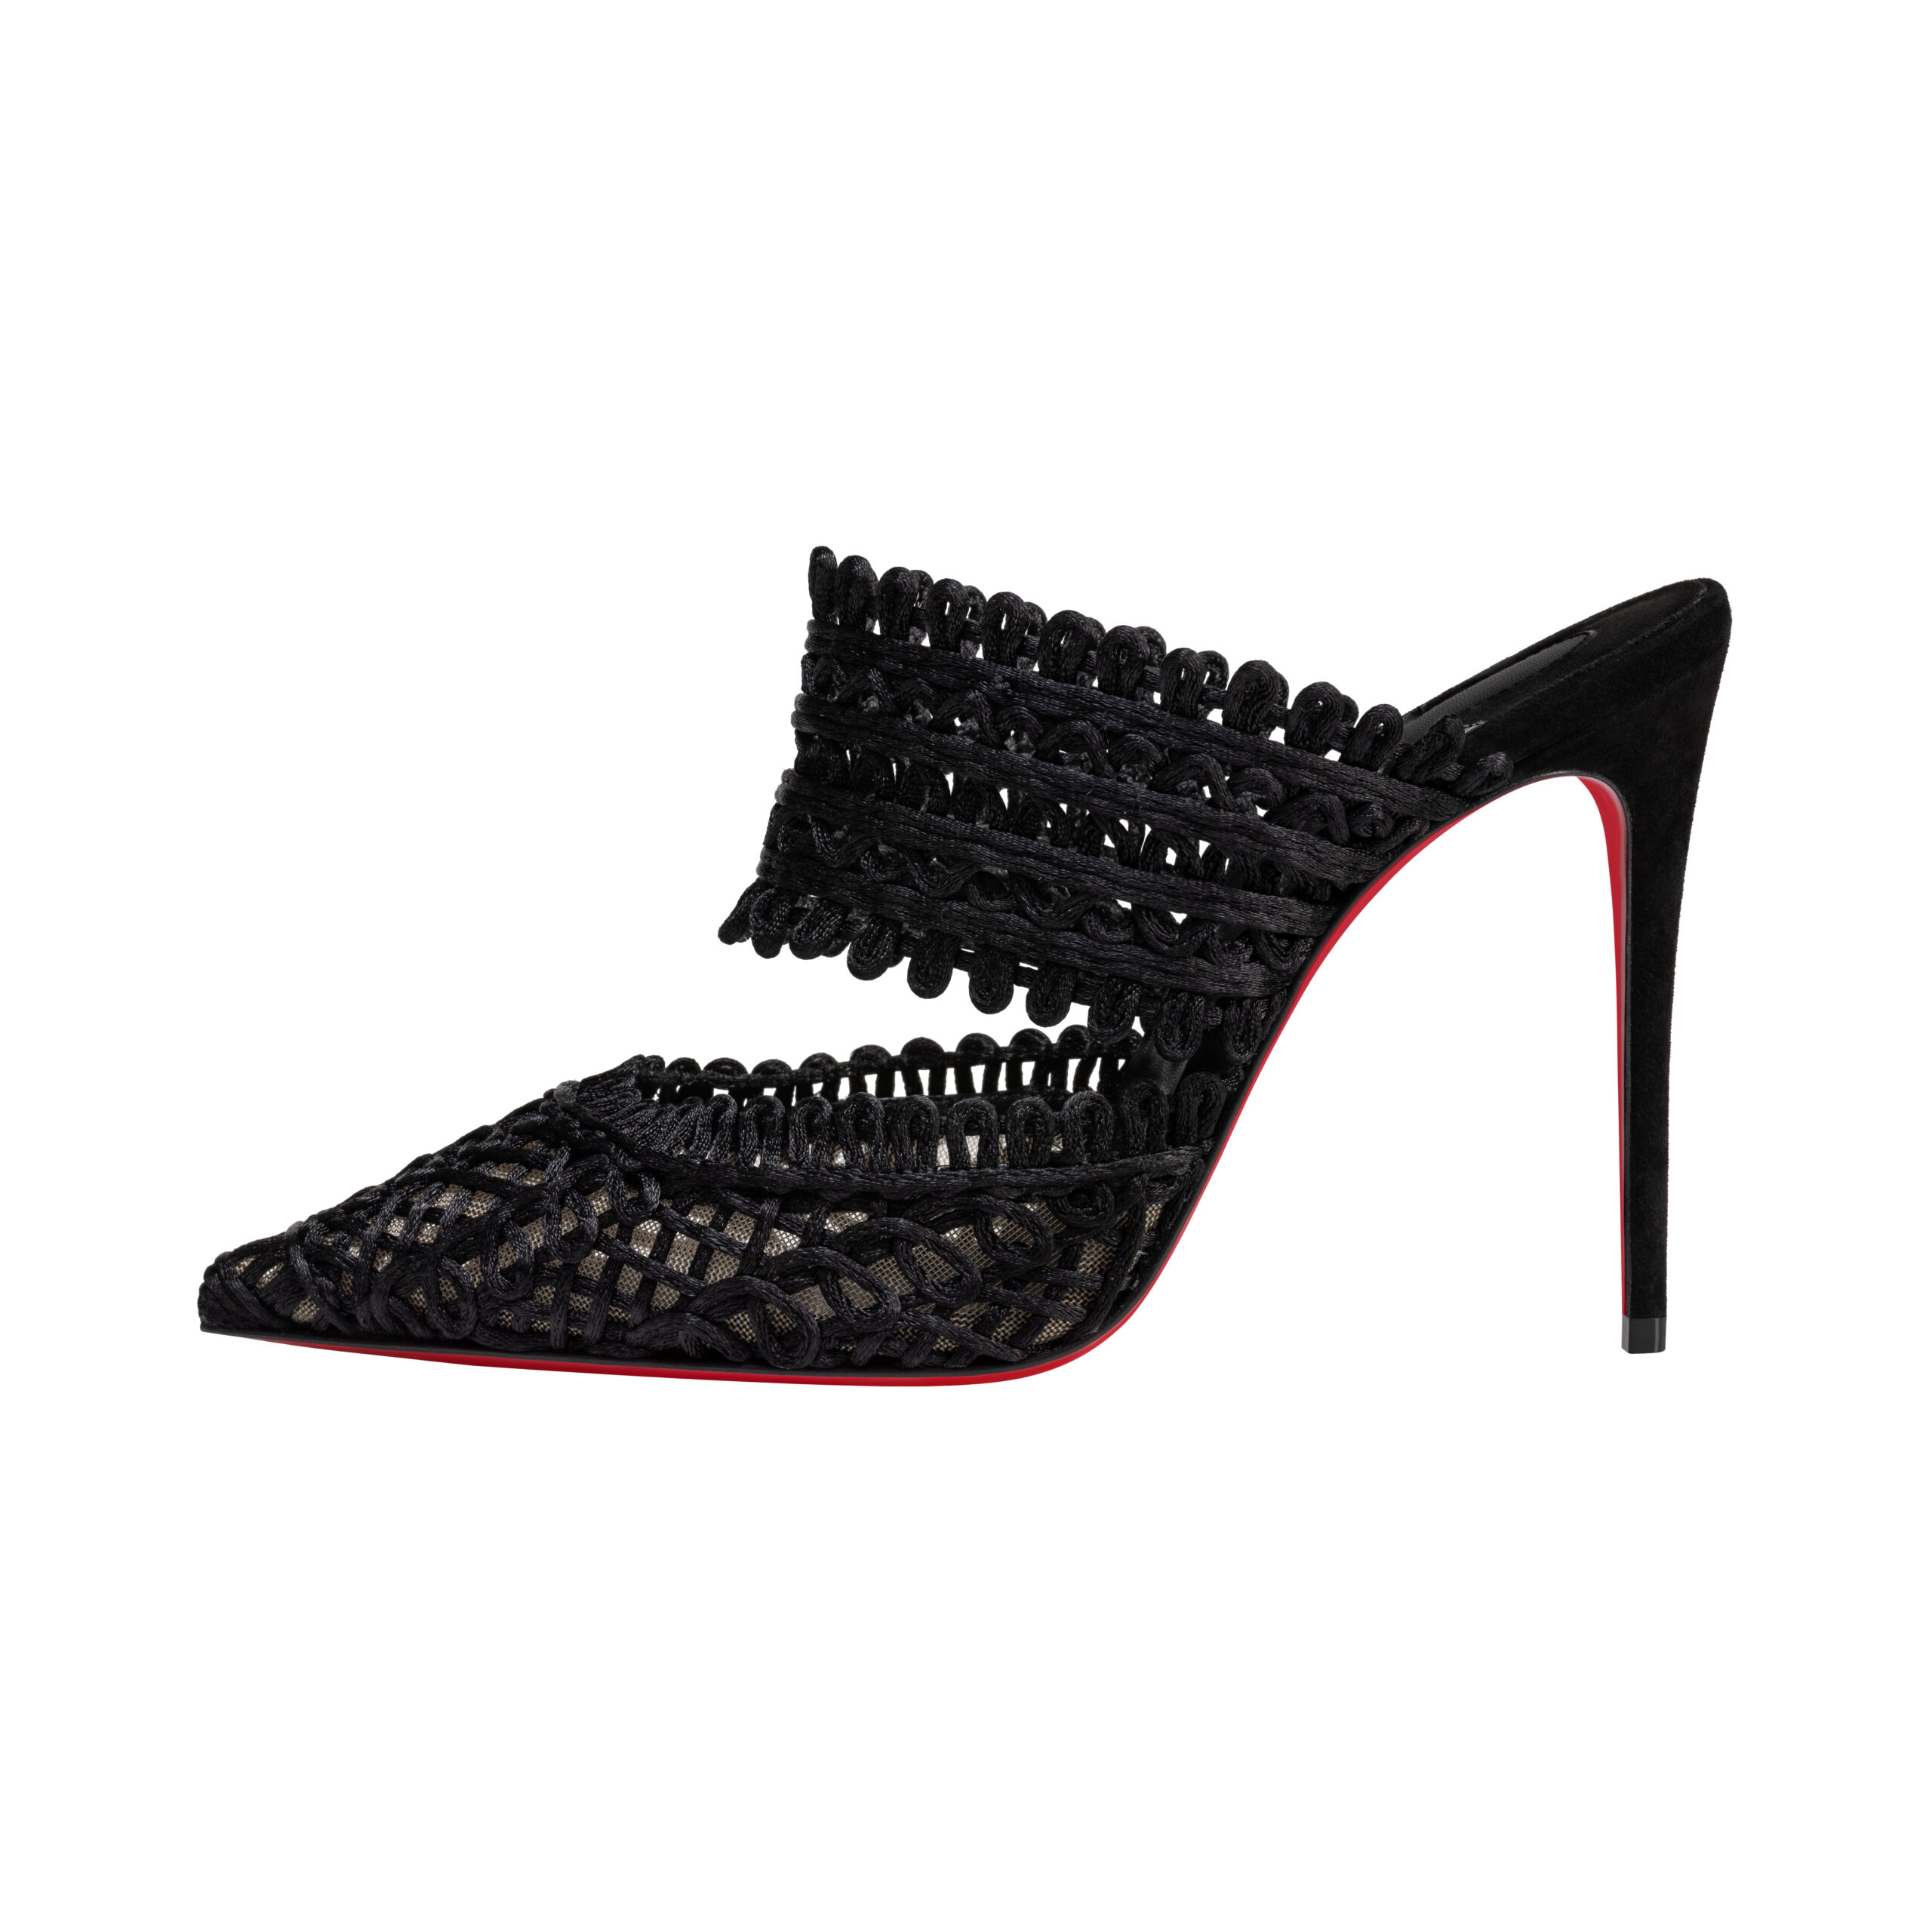 New shoes at Louboutin